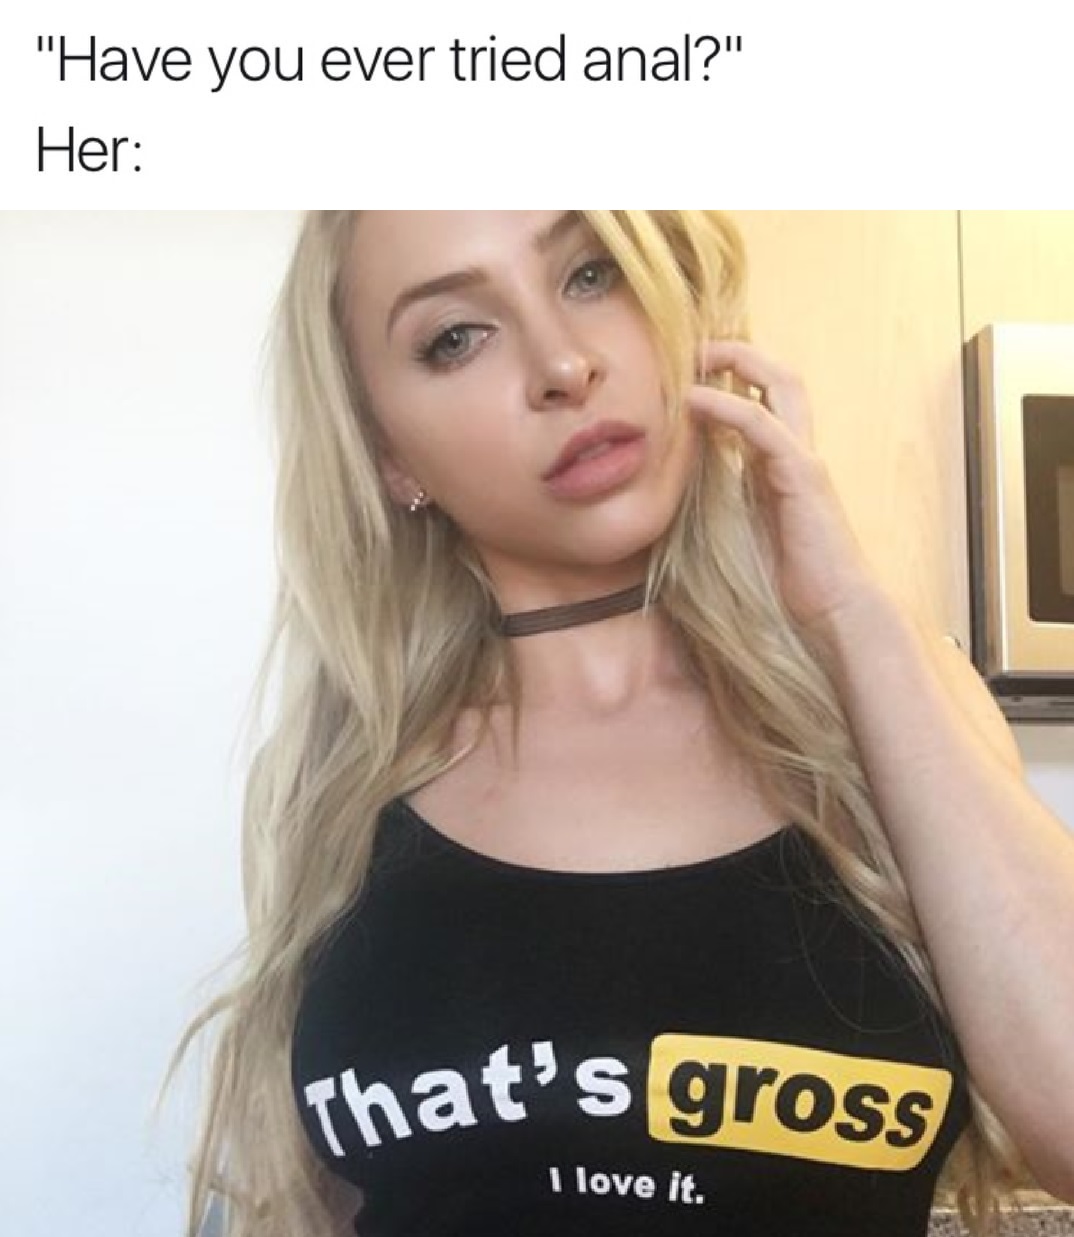 Funny meme about asking a girl if she likes it in the back door and pic of girl with shirt that says THAT's GROSS, I love it.